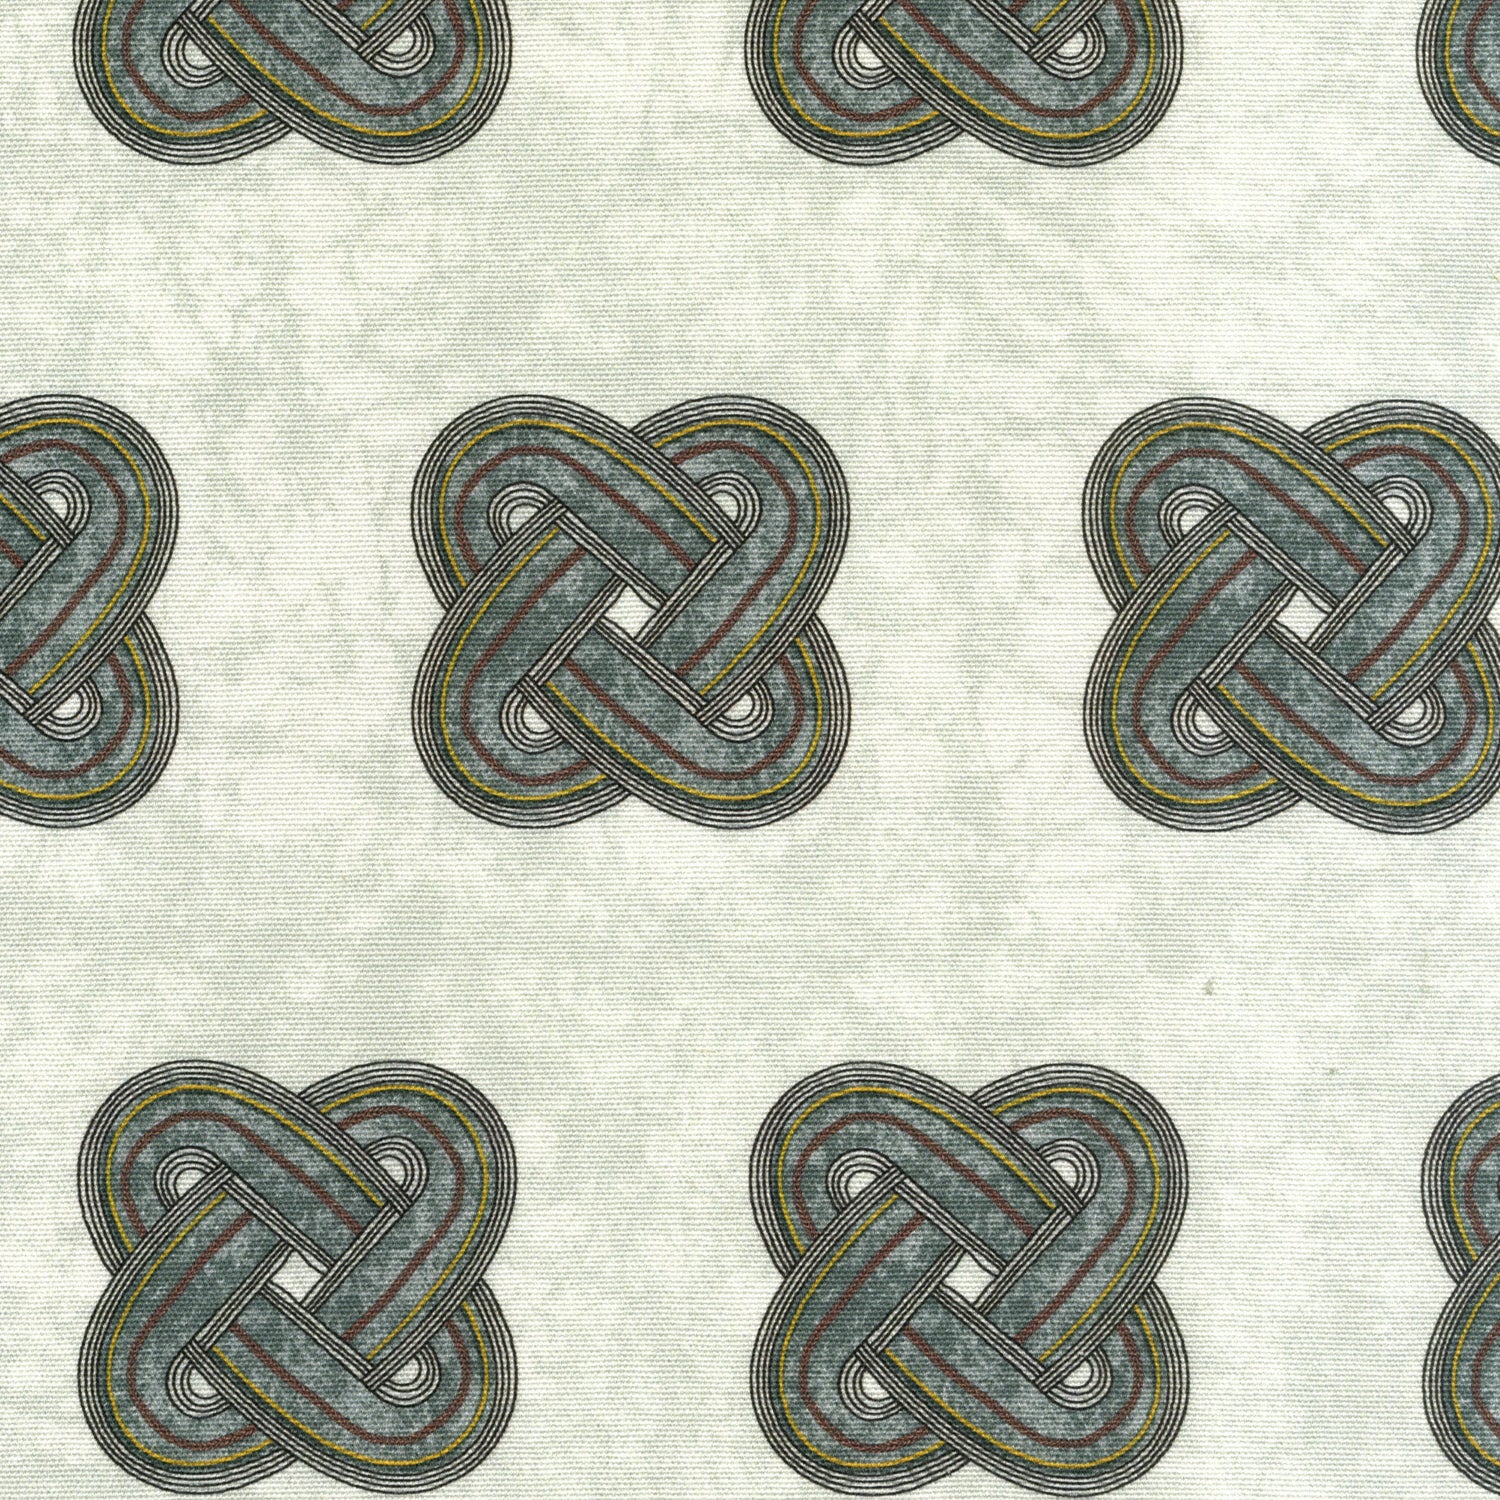 Detail of fabric in a repeating knot print in gray and yellow on a gray field.